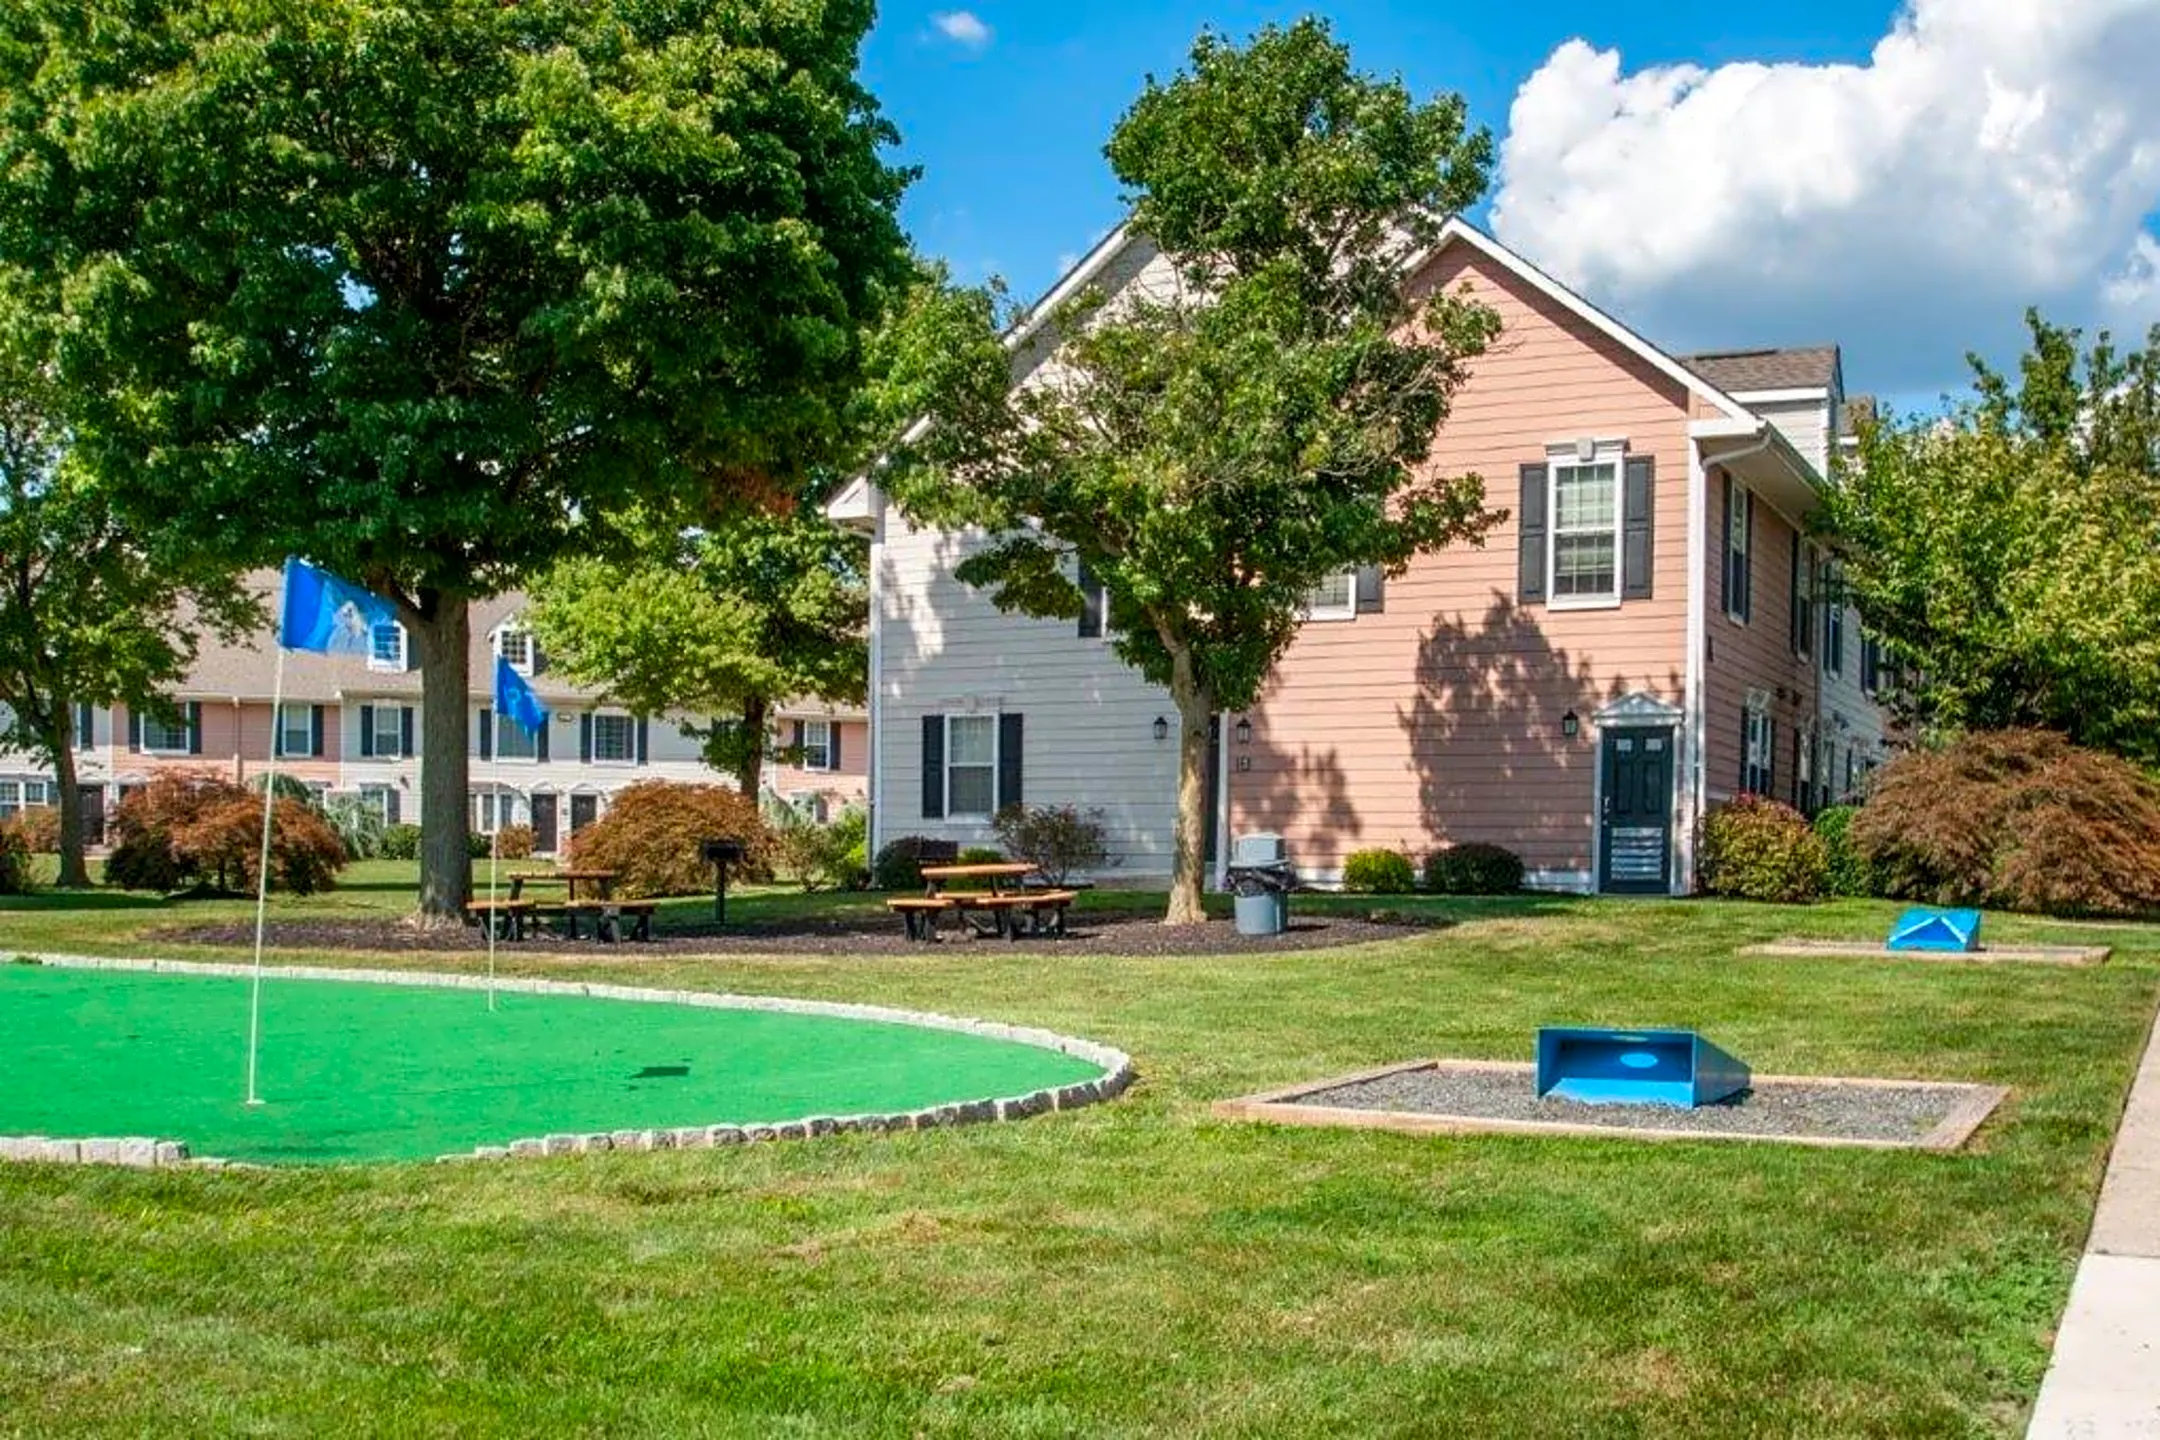 Montgomery Manor Apartments & Townhomes - Hatfield, PA